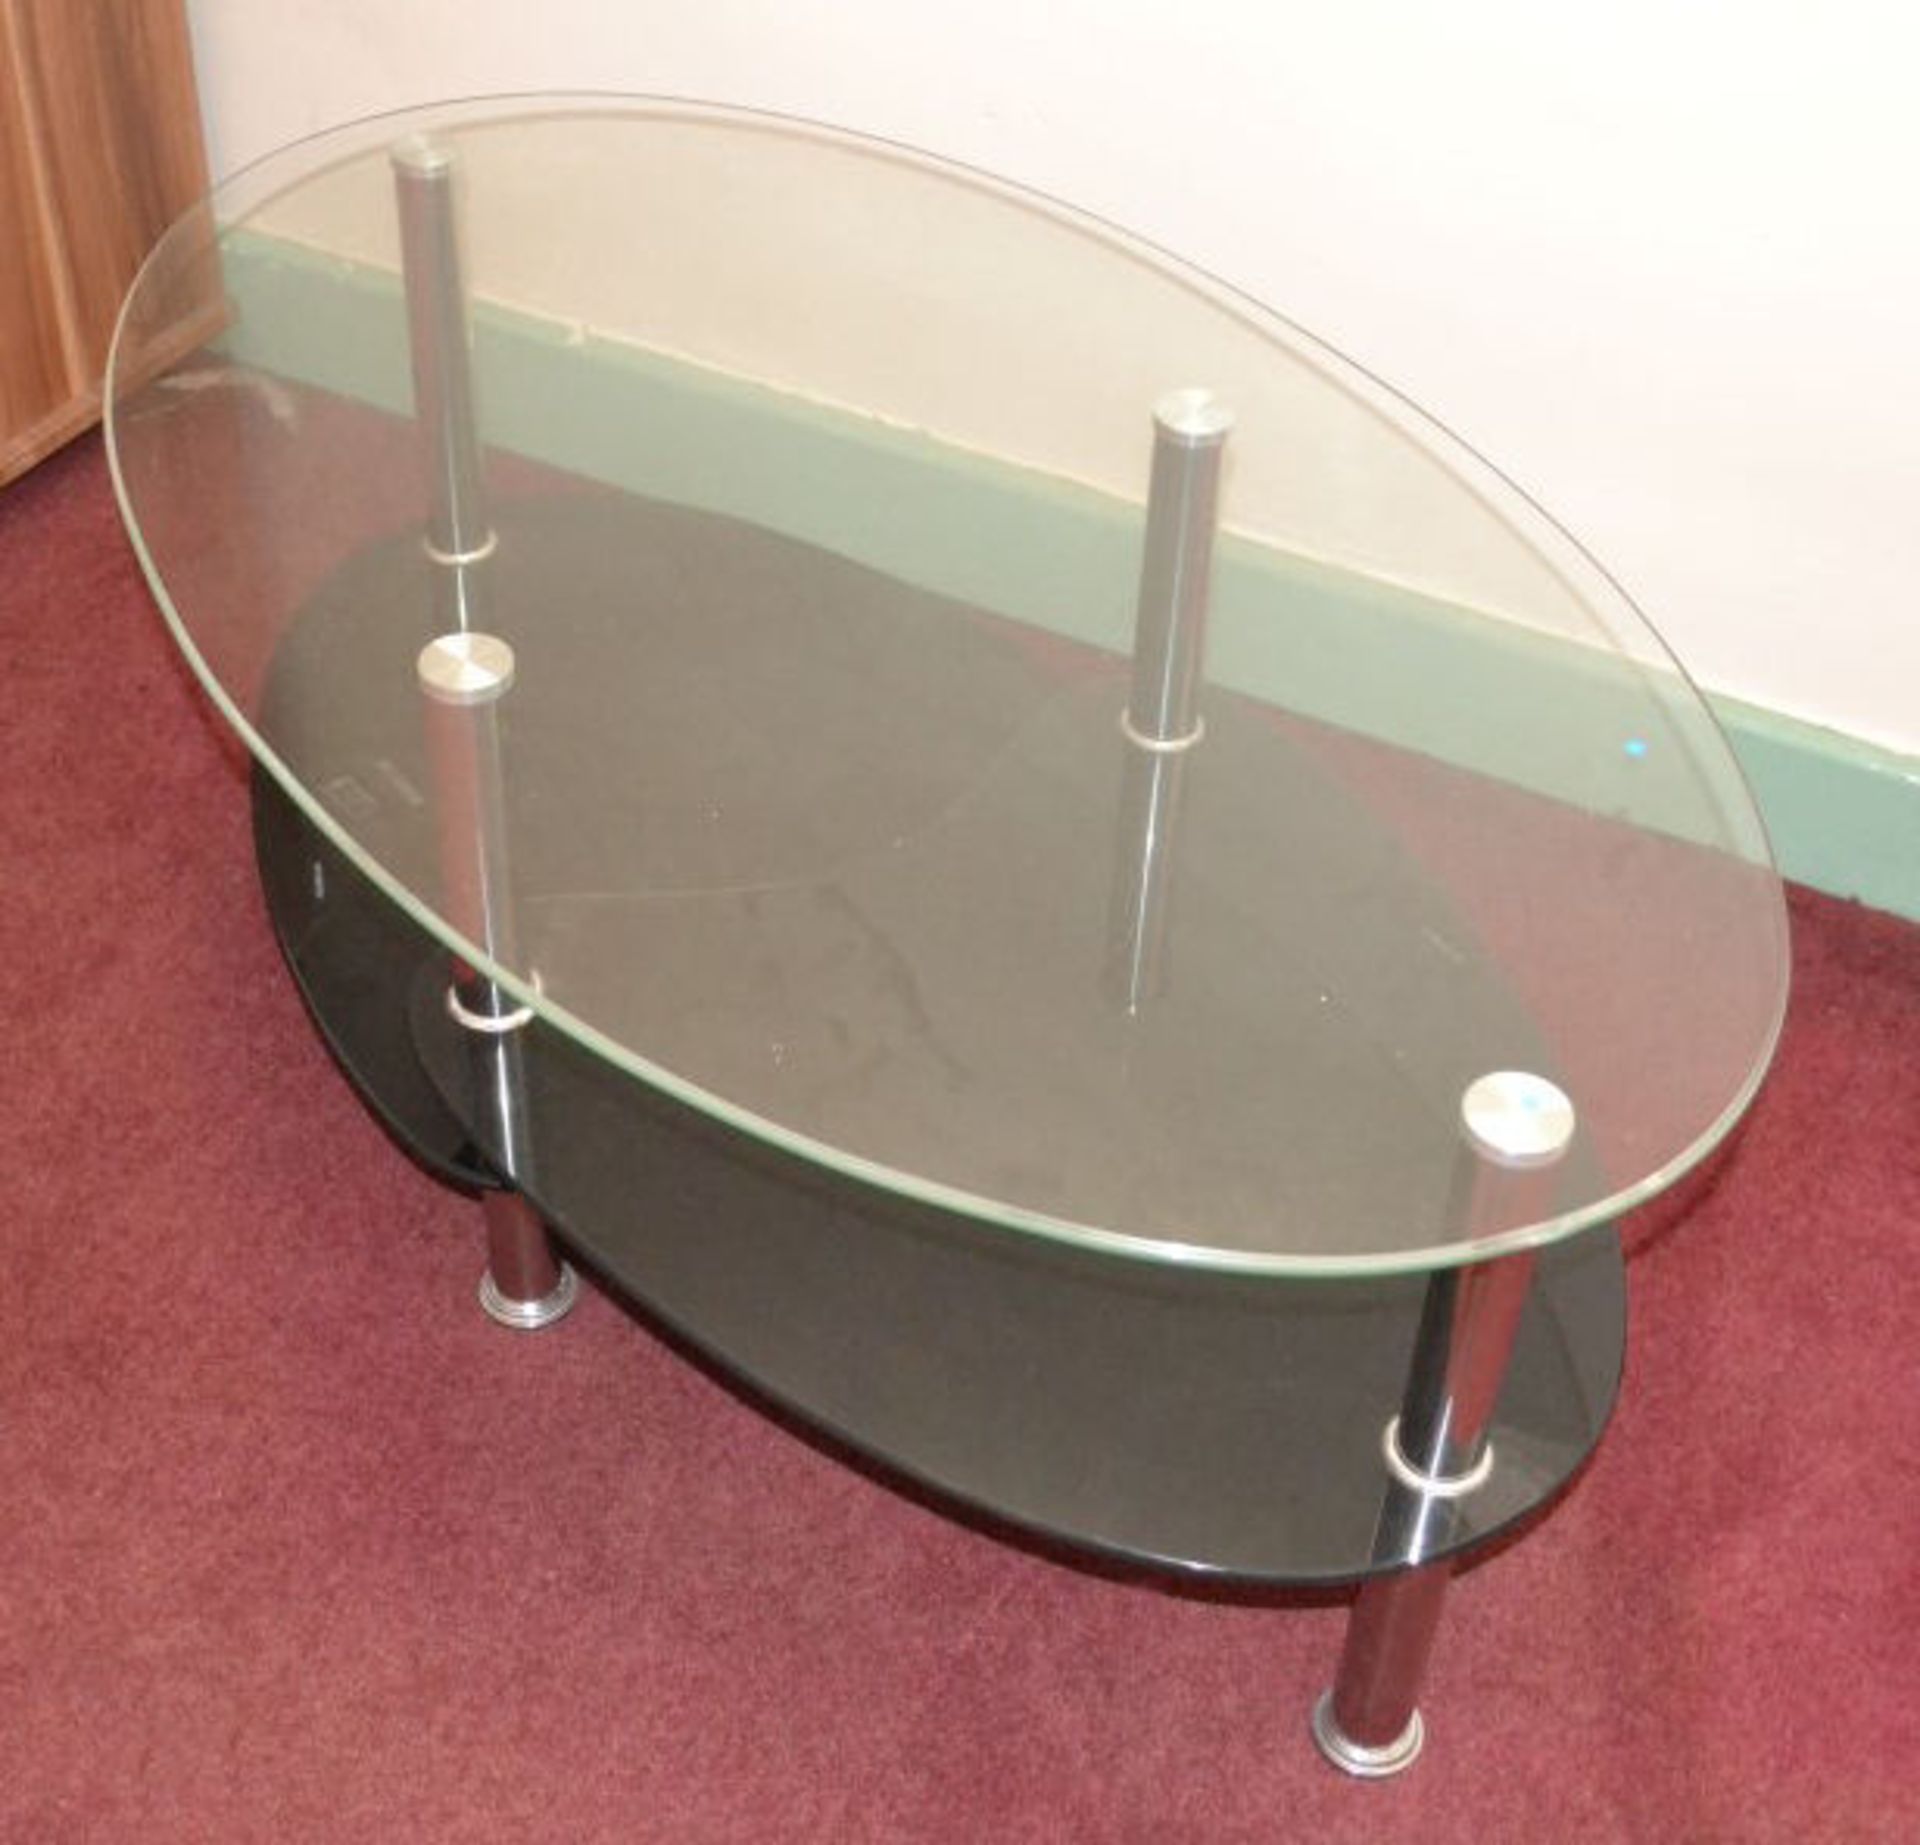 1 x Contemporary Oval Glass and Stainless Steel Coffee Table With 2 Tiered Shelves - Image 2 of 4